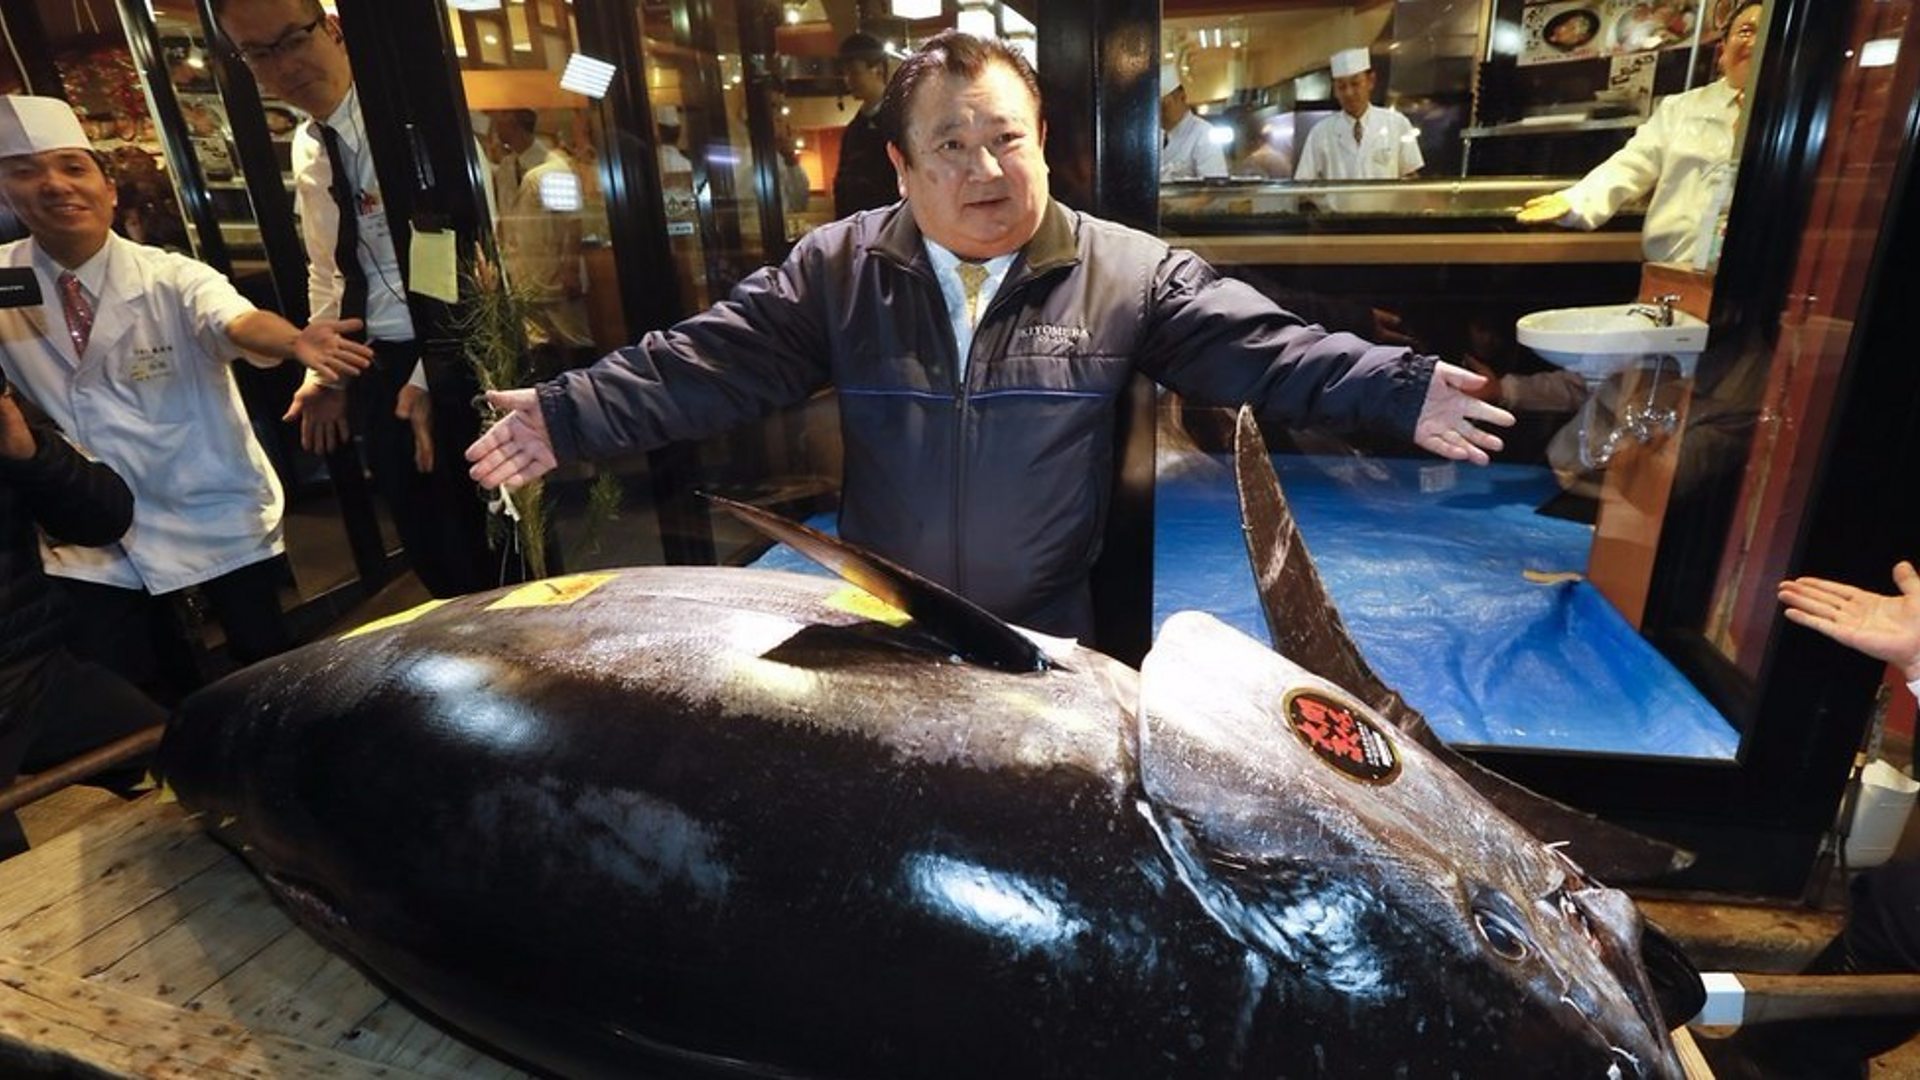 What is Japan's most prized fish?